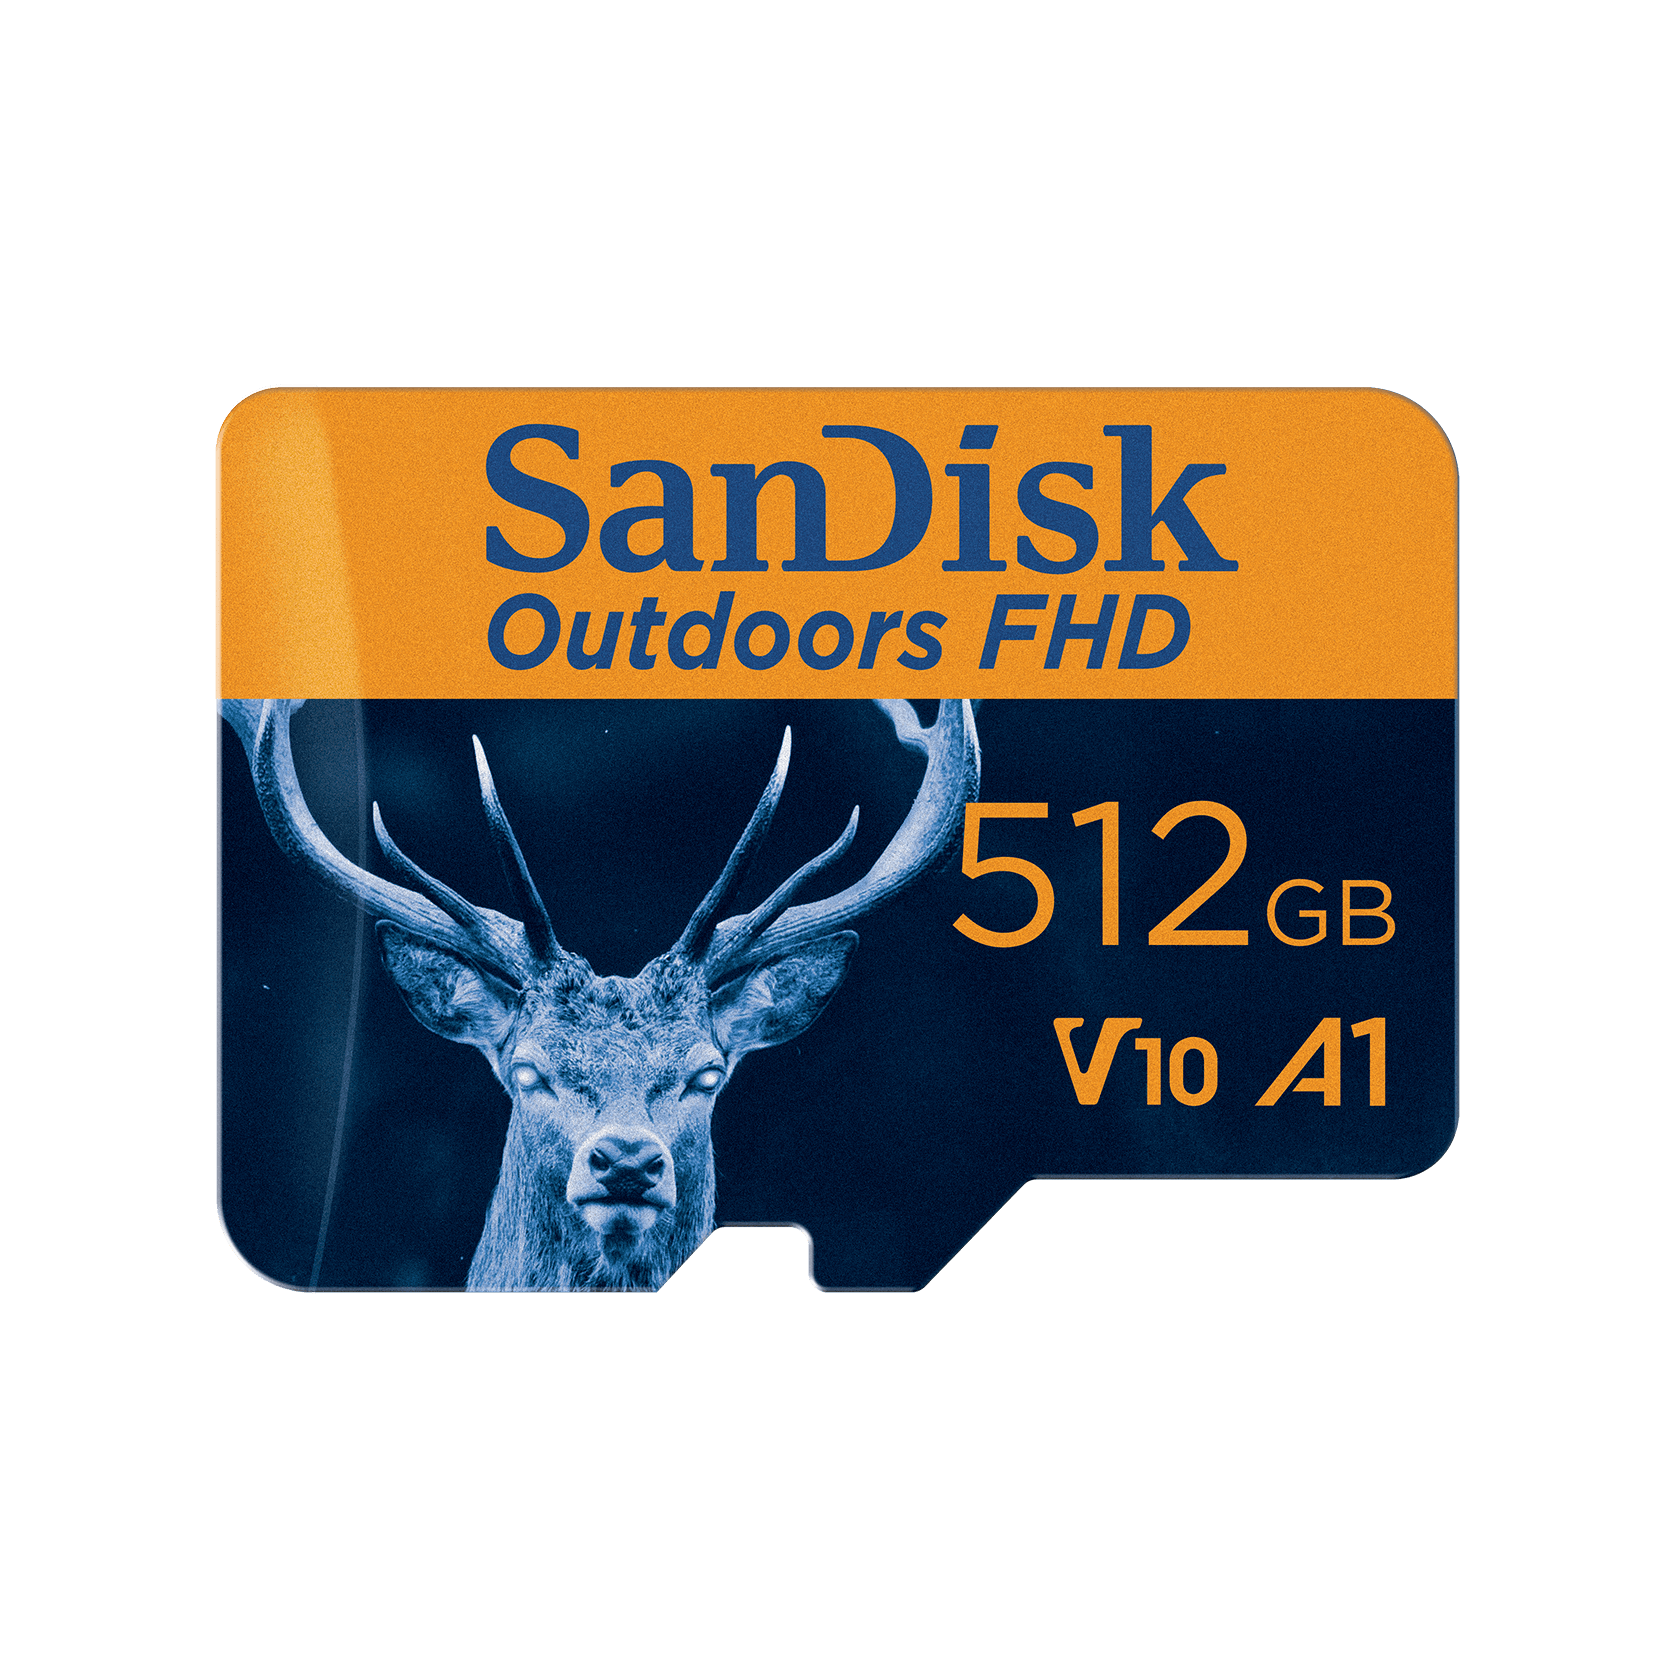 SanDisk Outdoors FHD MicroSDXC UHS-I Card With SD Adapter - 512GB Single Pack - SDSQUBL-512G-GN6VA